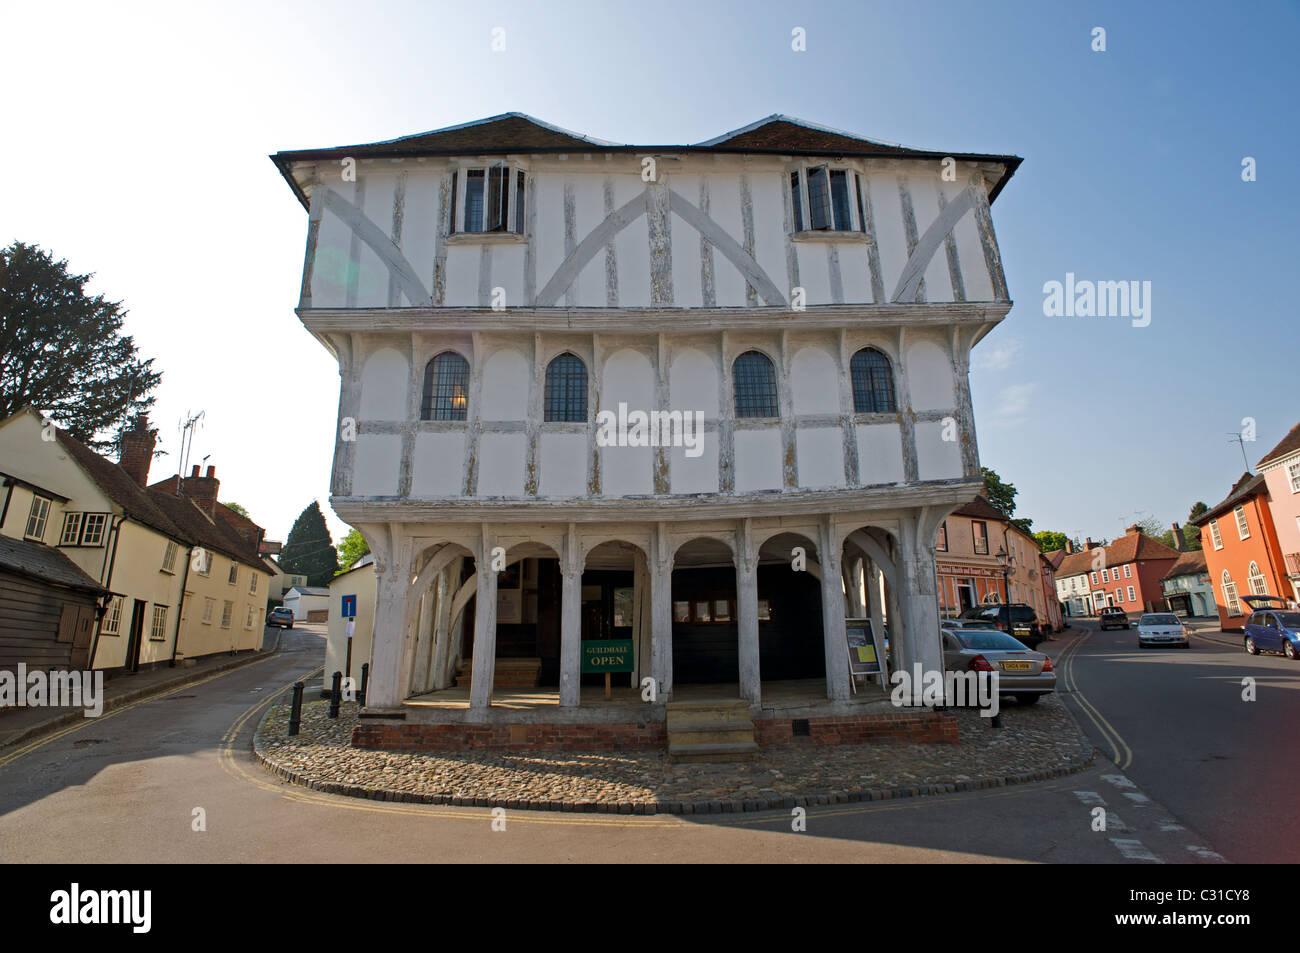 Guildhall Thaxted, Essex, Regno Unito. Foto Stock